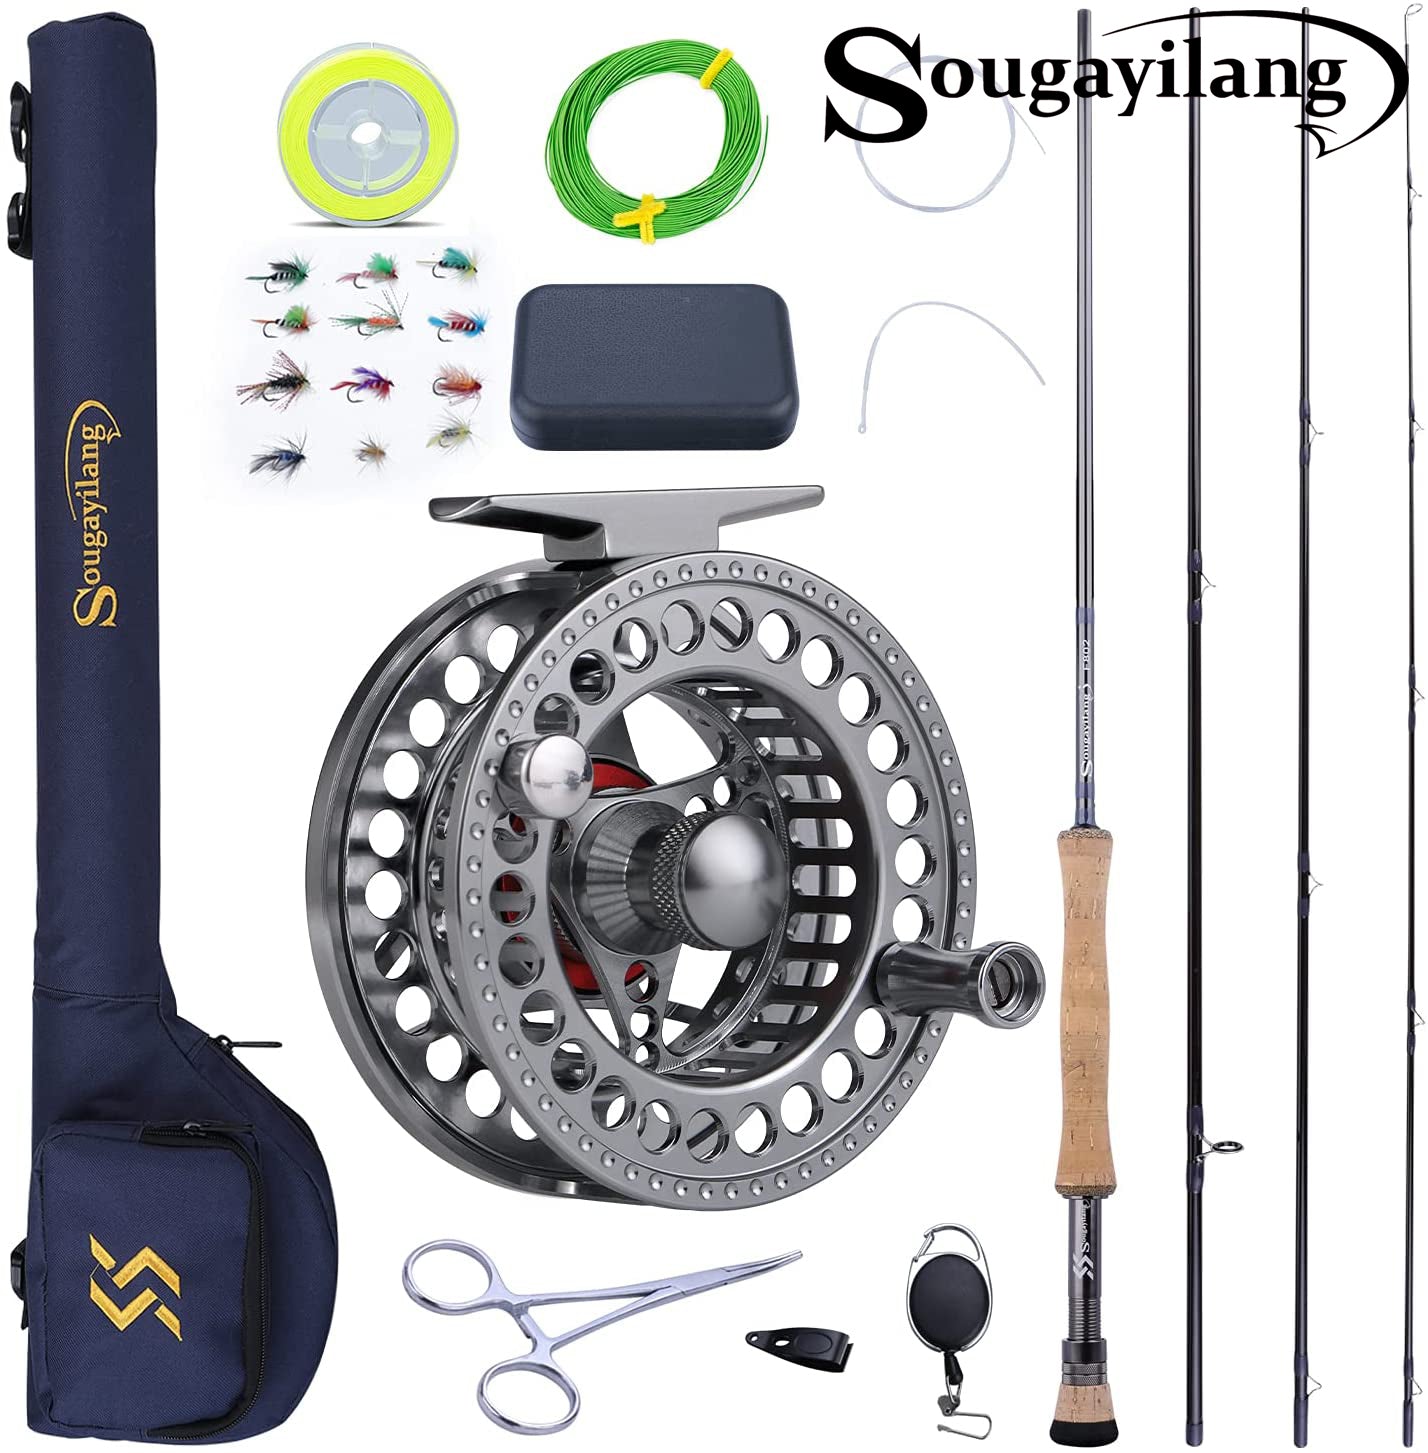 Sougayilang Fly Fishing Rod 4-Piece 9-Feet Lightweight Ultra Portable Fly  Fishing Pole for Trout Salmon Sunfish Outfit Travel Fishing